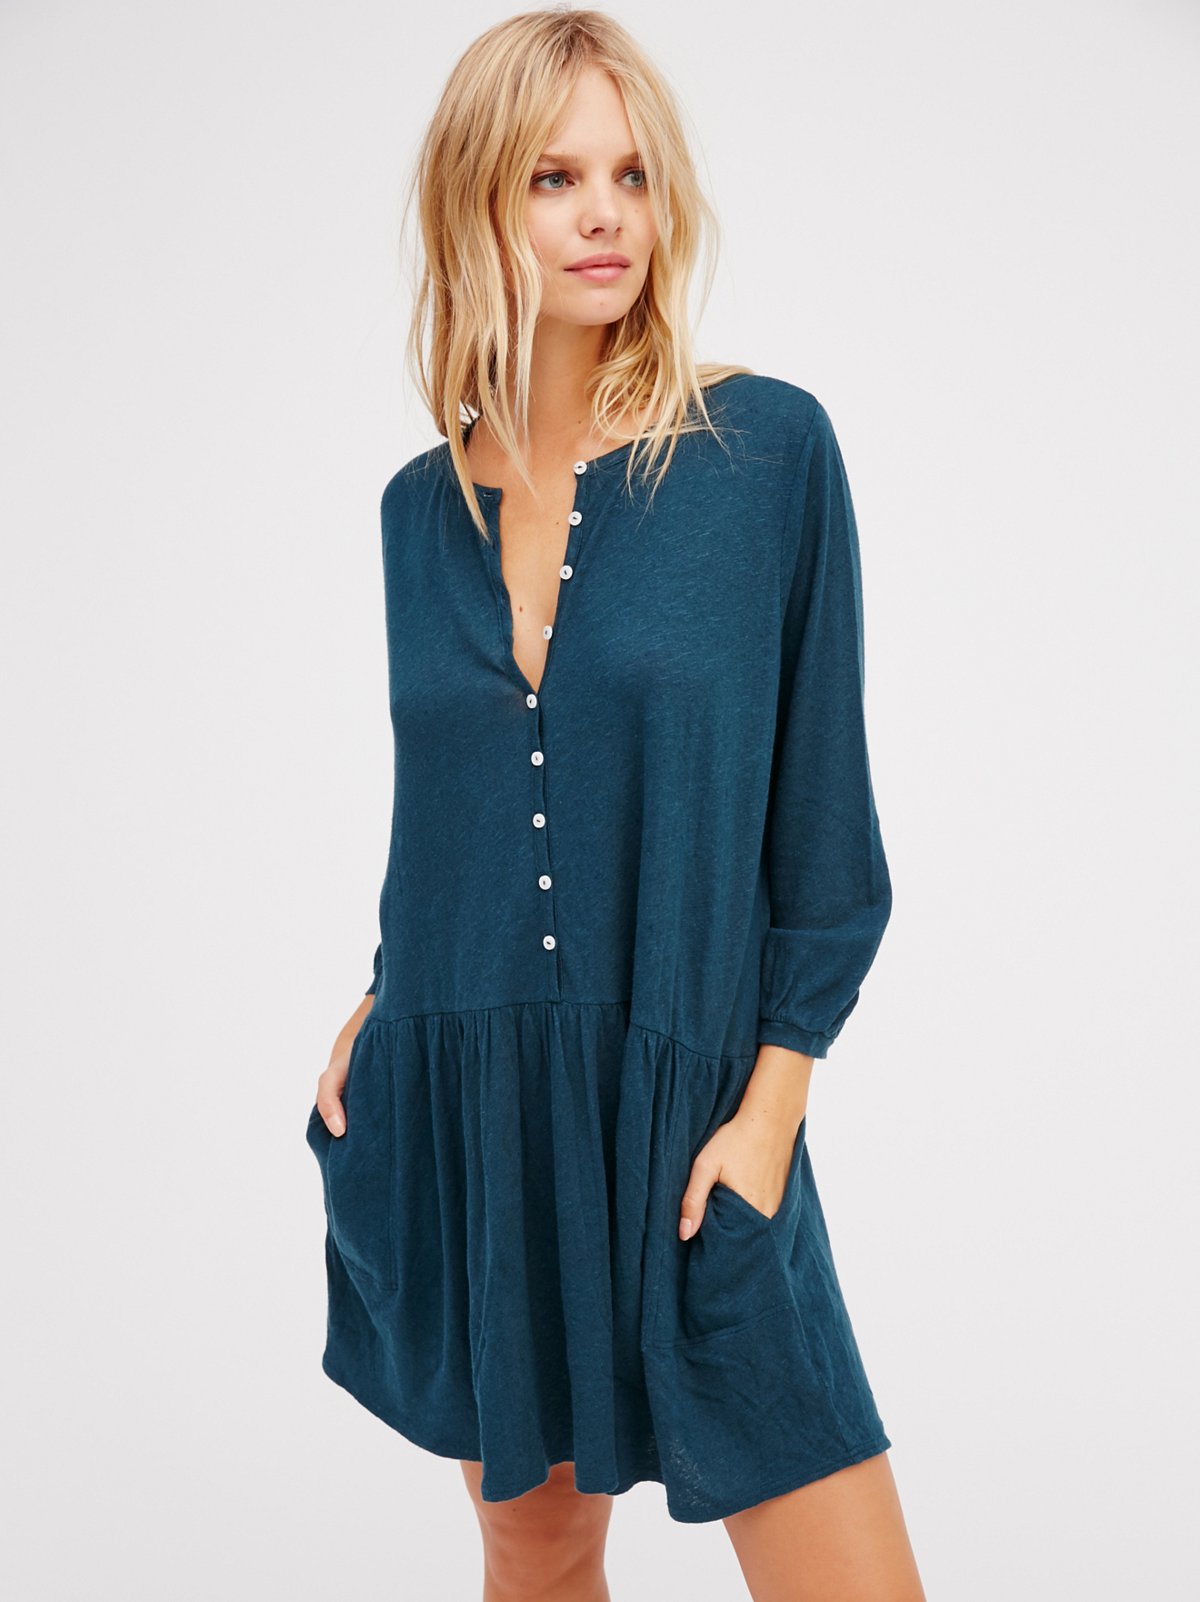 FP Beach Button Up Dress at Free People Clothing Boutique